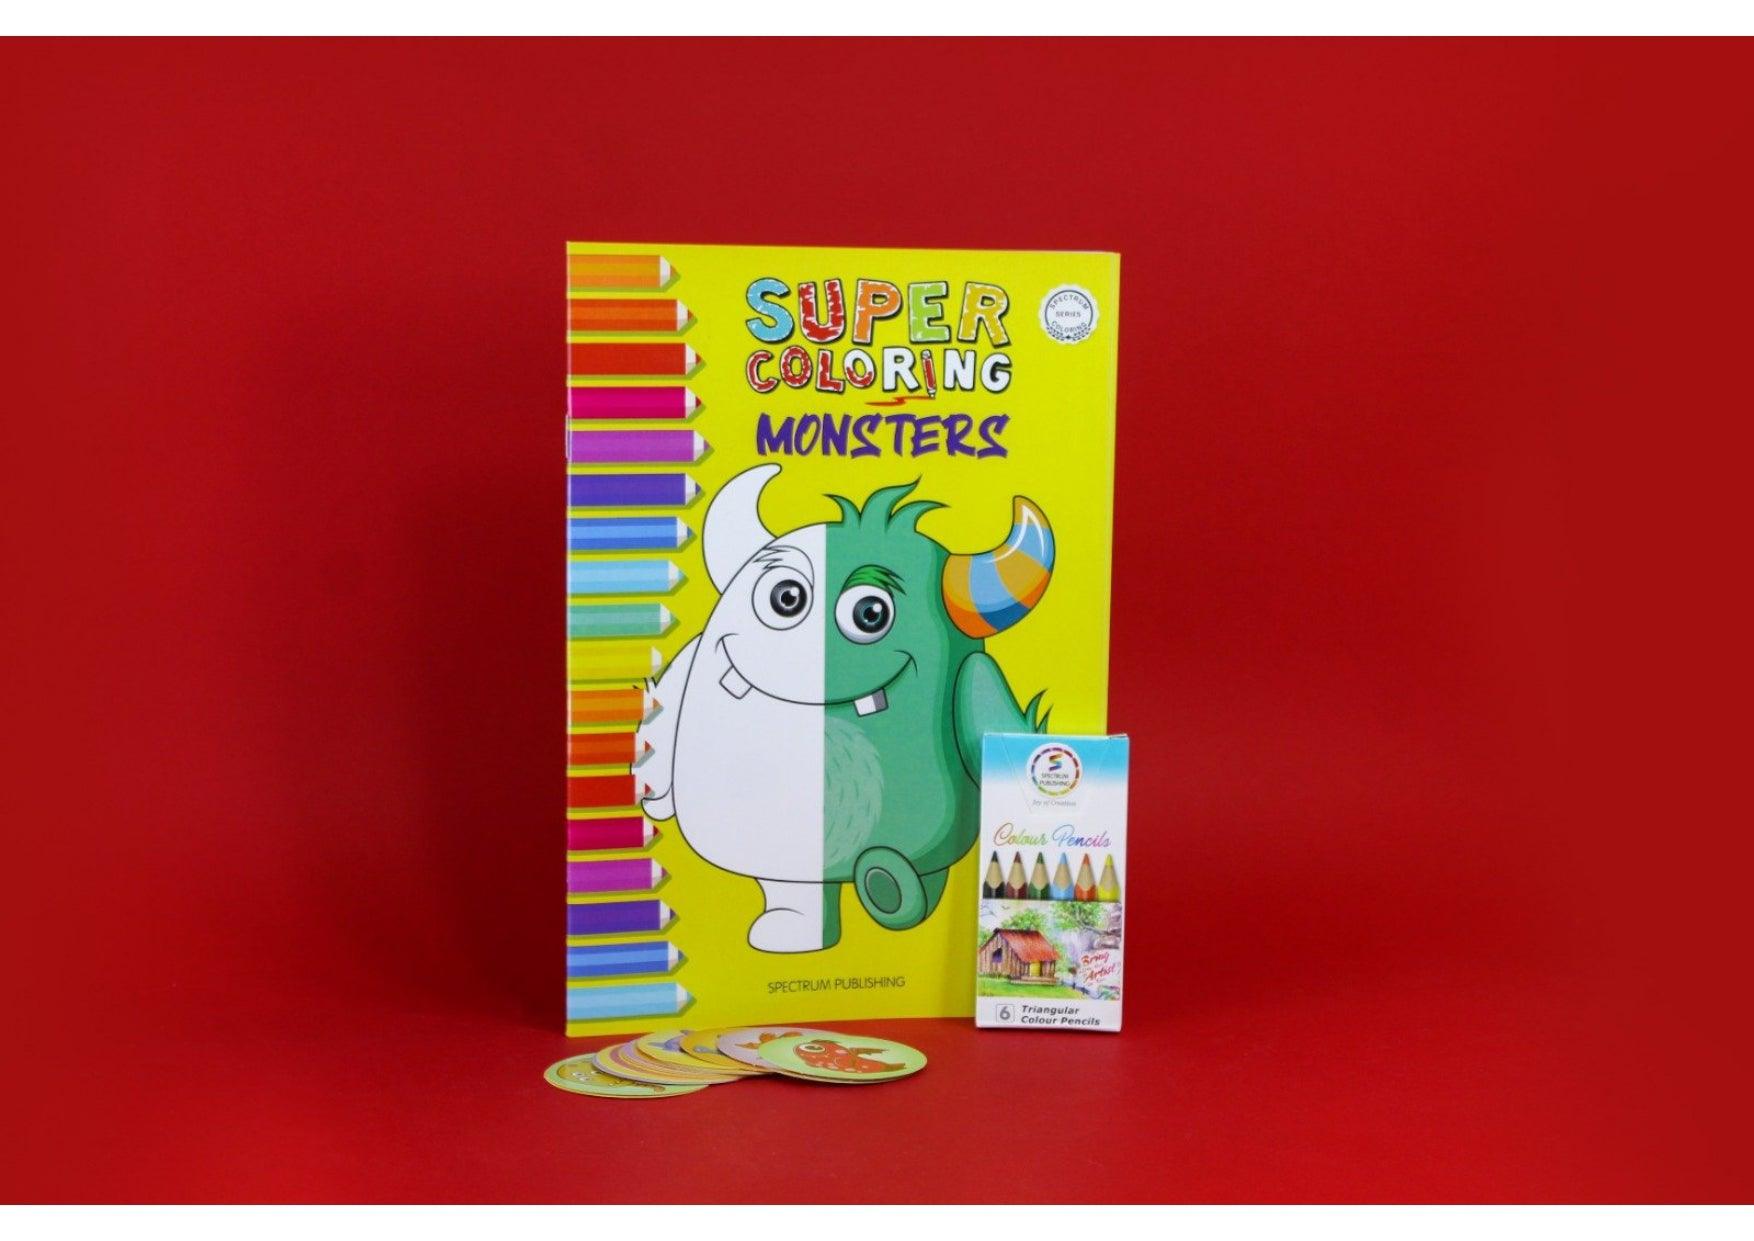 Super coloring monsters book - Ourkids - Spectrum Publishing